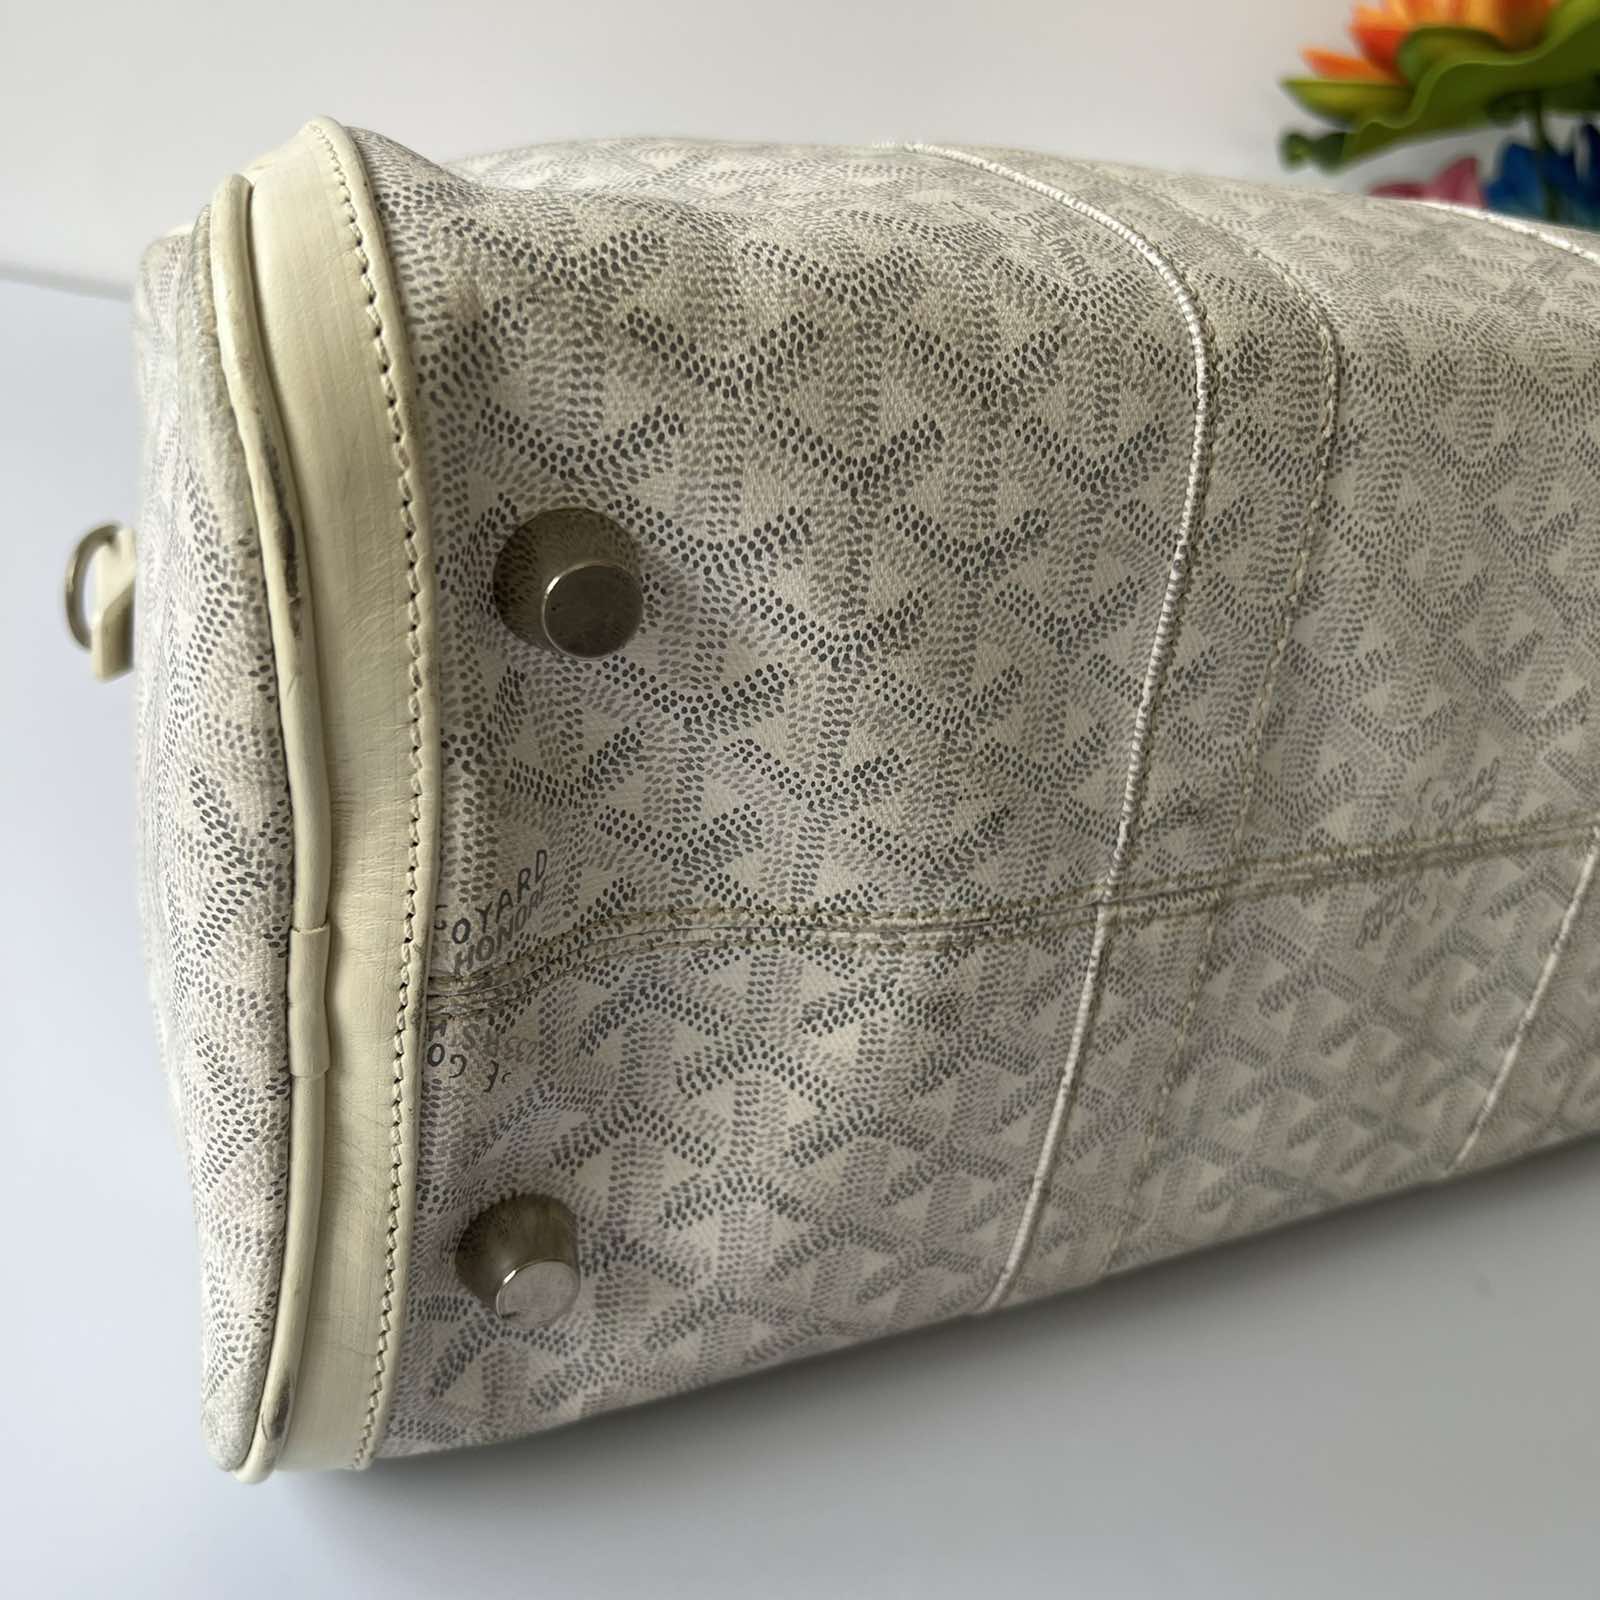 SOLD/LAYAWAY💕 Goyard Croisiere 35 with Heart Print Canvas